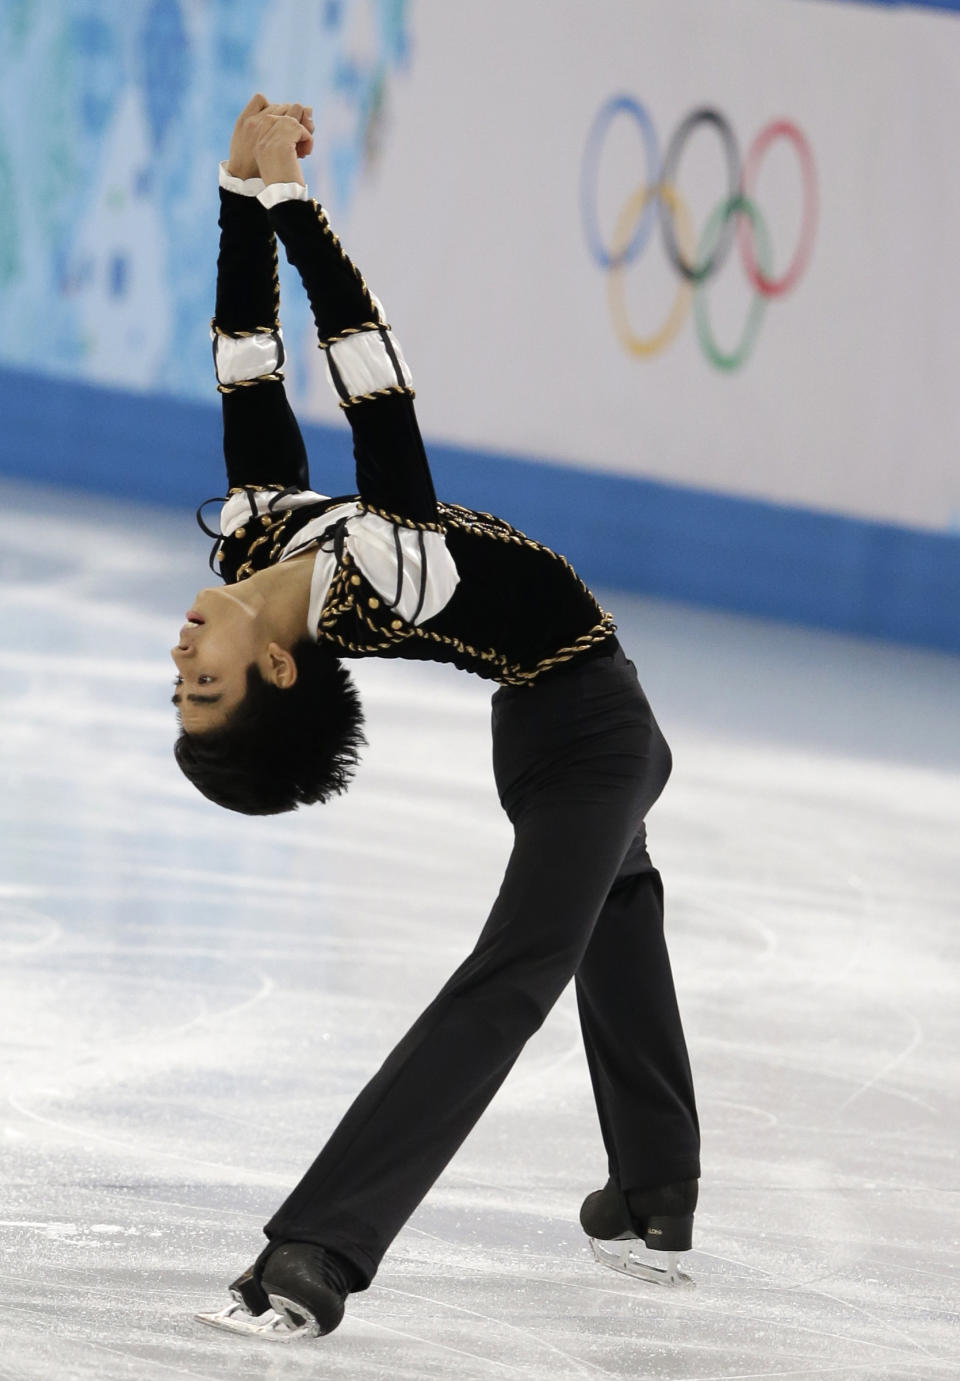 Michael Christian Martinez of the Philippines competes in the men's short program figure skating competition at the Iceberg Skating Palace during the 2014 Winter Olympics, Thursday, Feb. 13, 2014, in Sochi, Russia. (AP Photo/Darron Cummings)